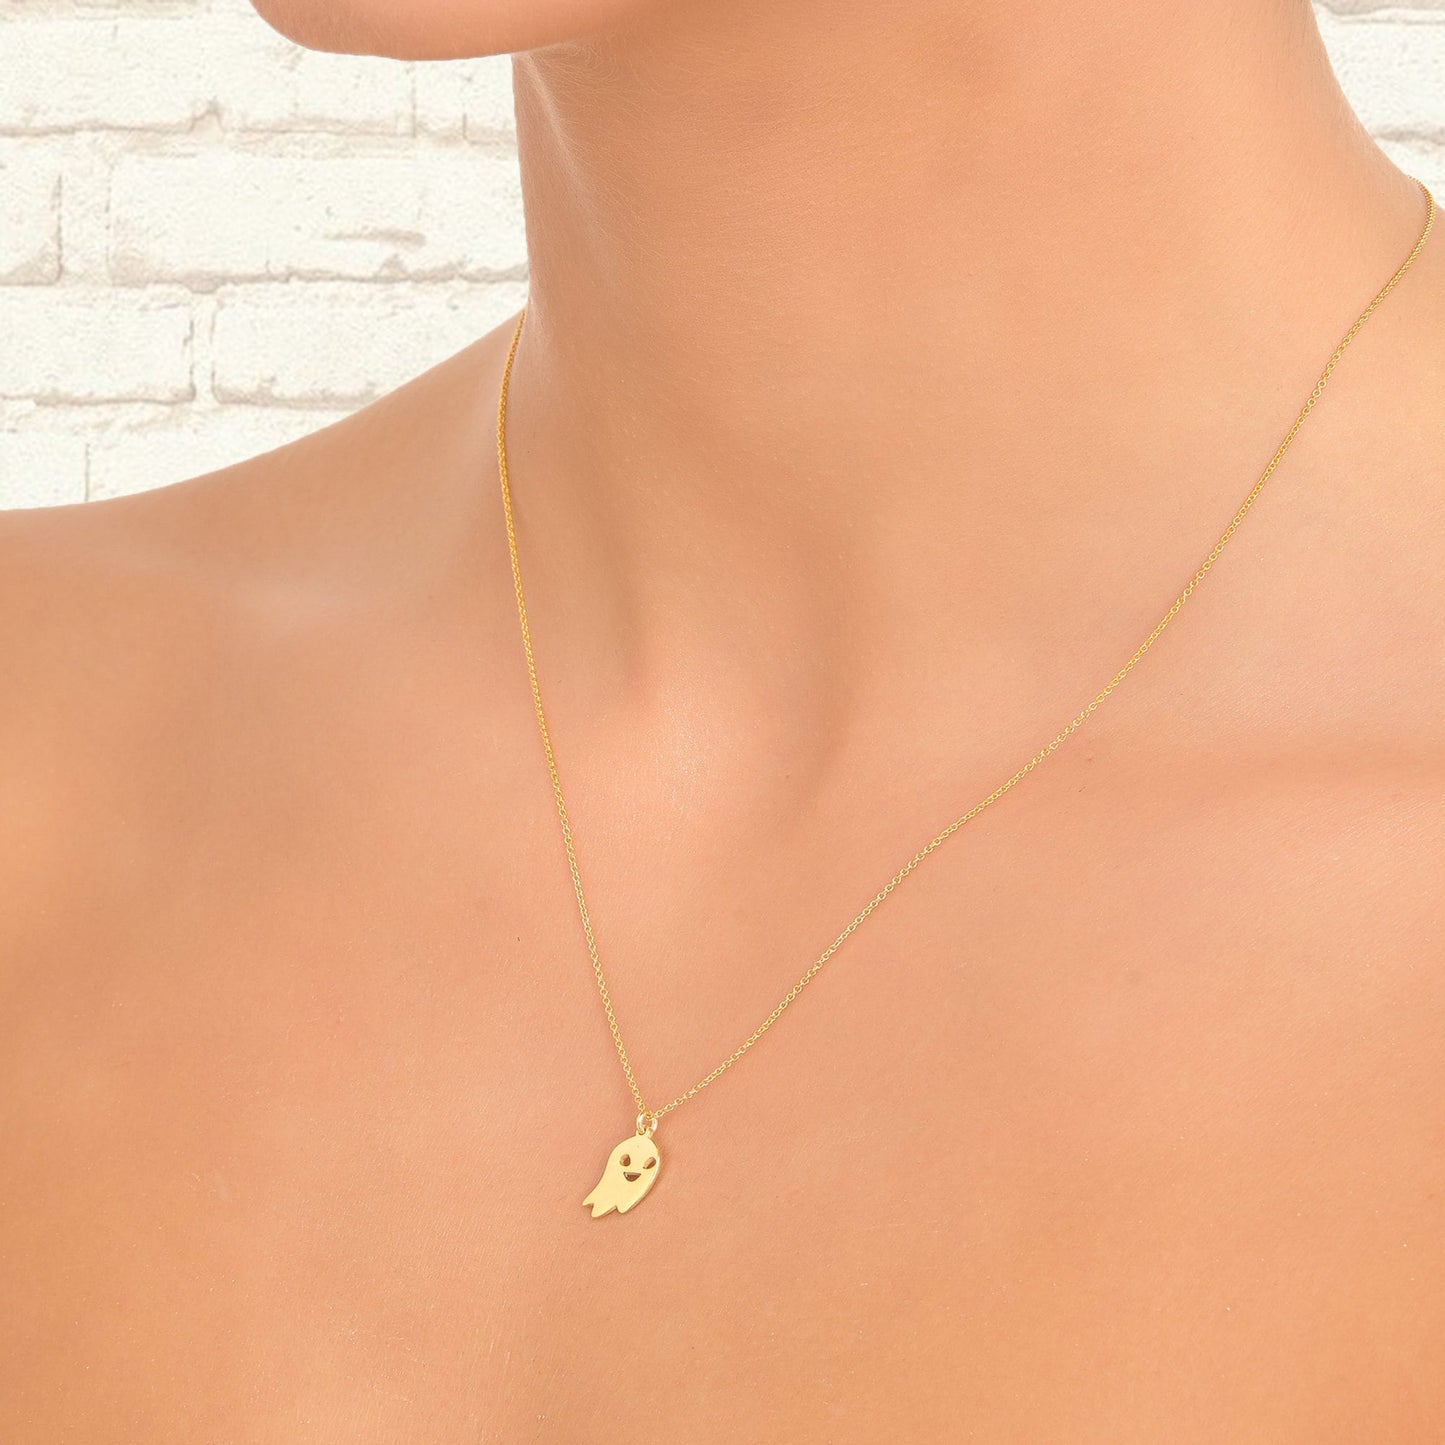 Cute Ghost Necklace, 14K Solid Gold Ghost Charm Necklace, Halloween Gift, Girlfriend Gift, Personalized, Best Friend Gift, Gift For her